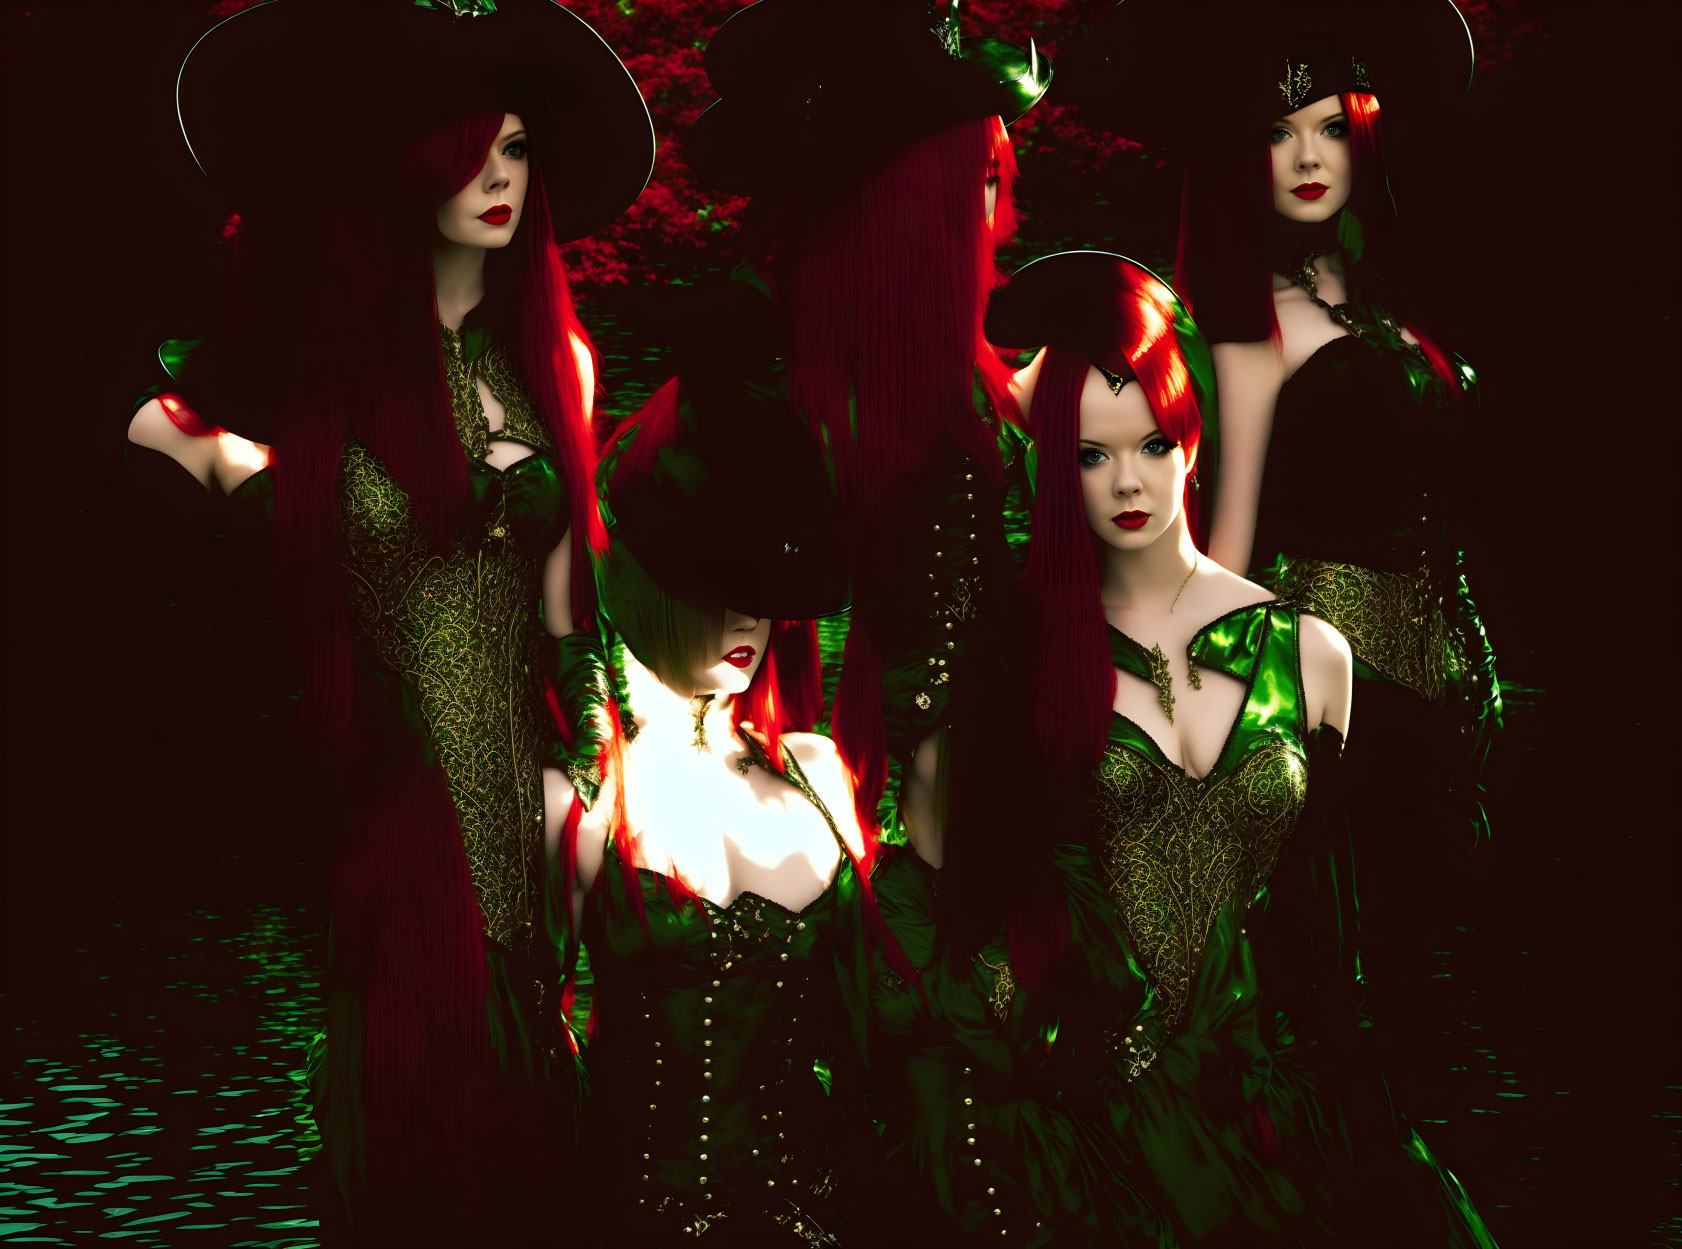 Stylized digital art: Four red-haired women in green dresses in dark, moody forest